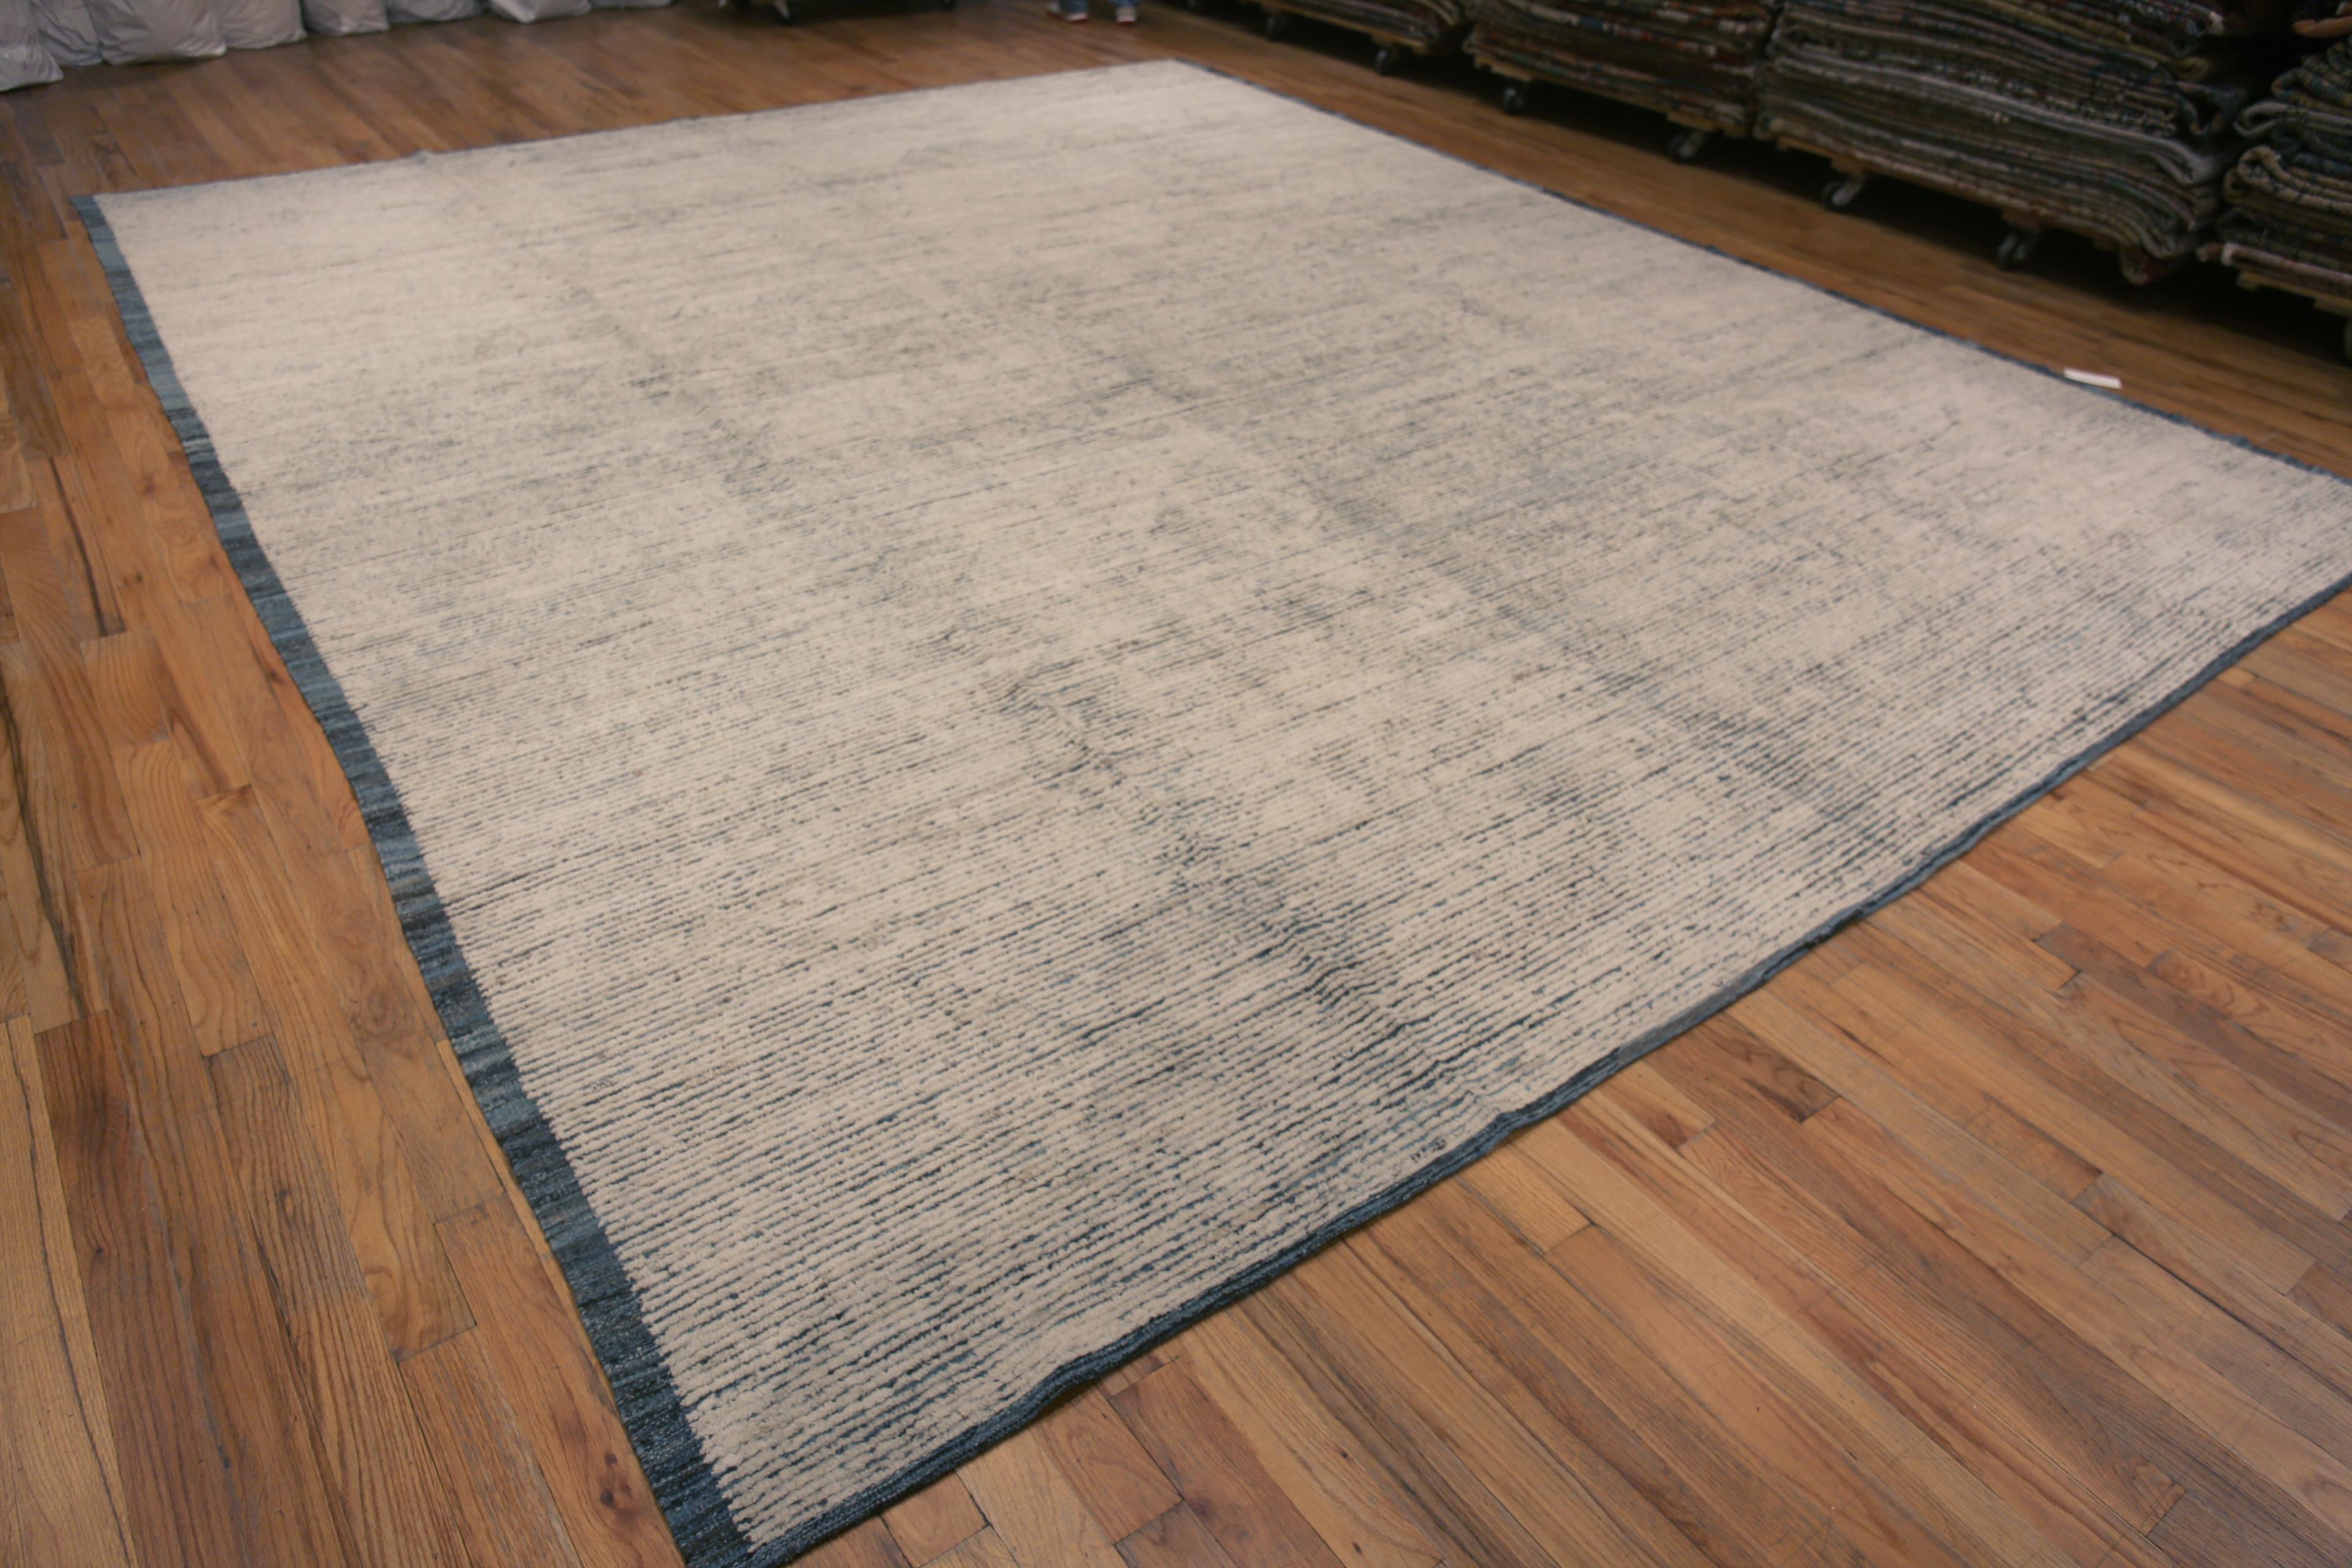 Decorative and Versatile Large Size Modern Solid Abstract Design Cream Color Wool Pile Area Rug, Country Of Origin: Central Asia, Circa Date: Modern Rug 